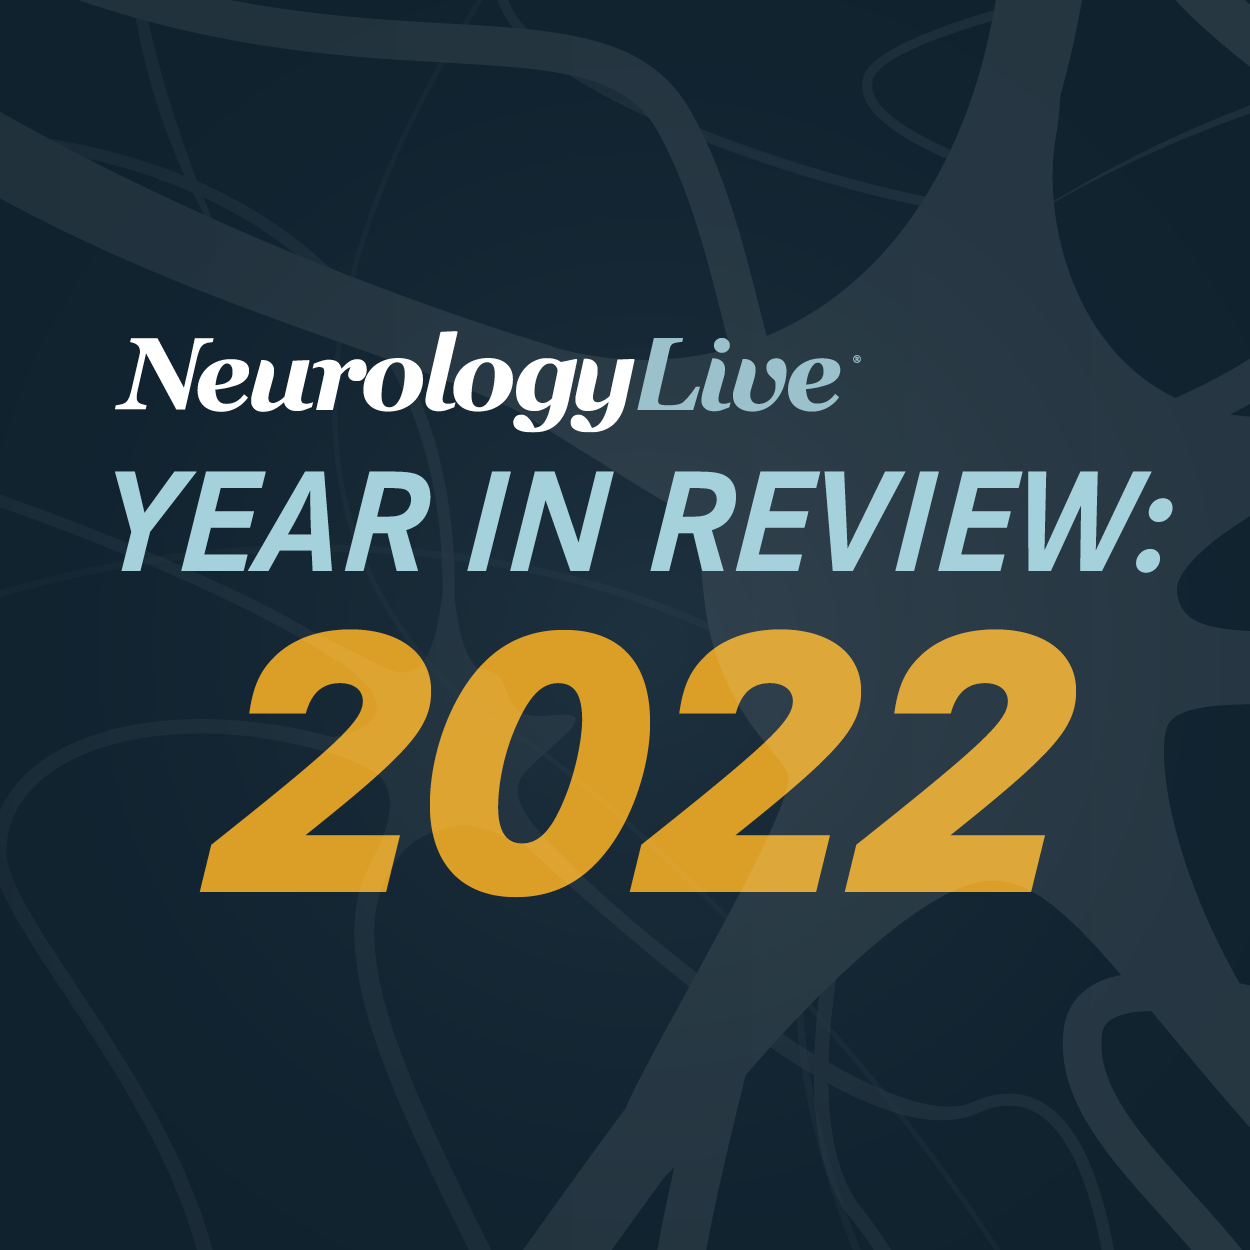 NeurologyLive® Year in Review 2022: Most-Watched Sleep Disorder Expert Interviews